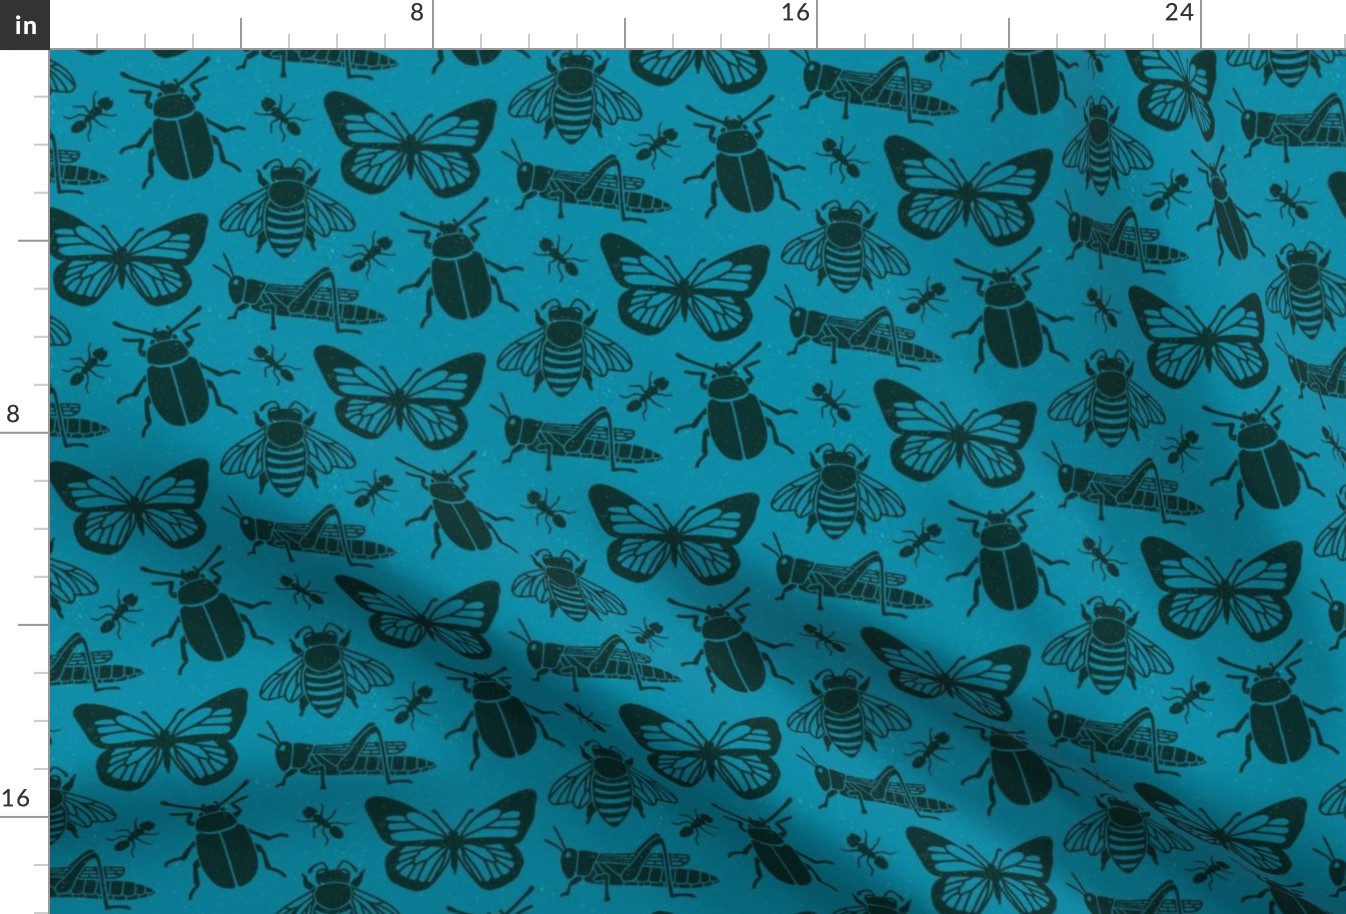 Insect Friends - Teal